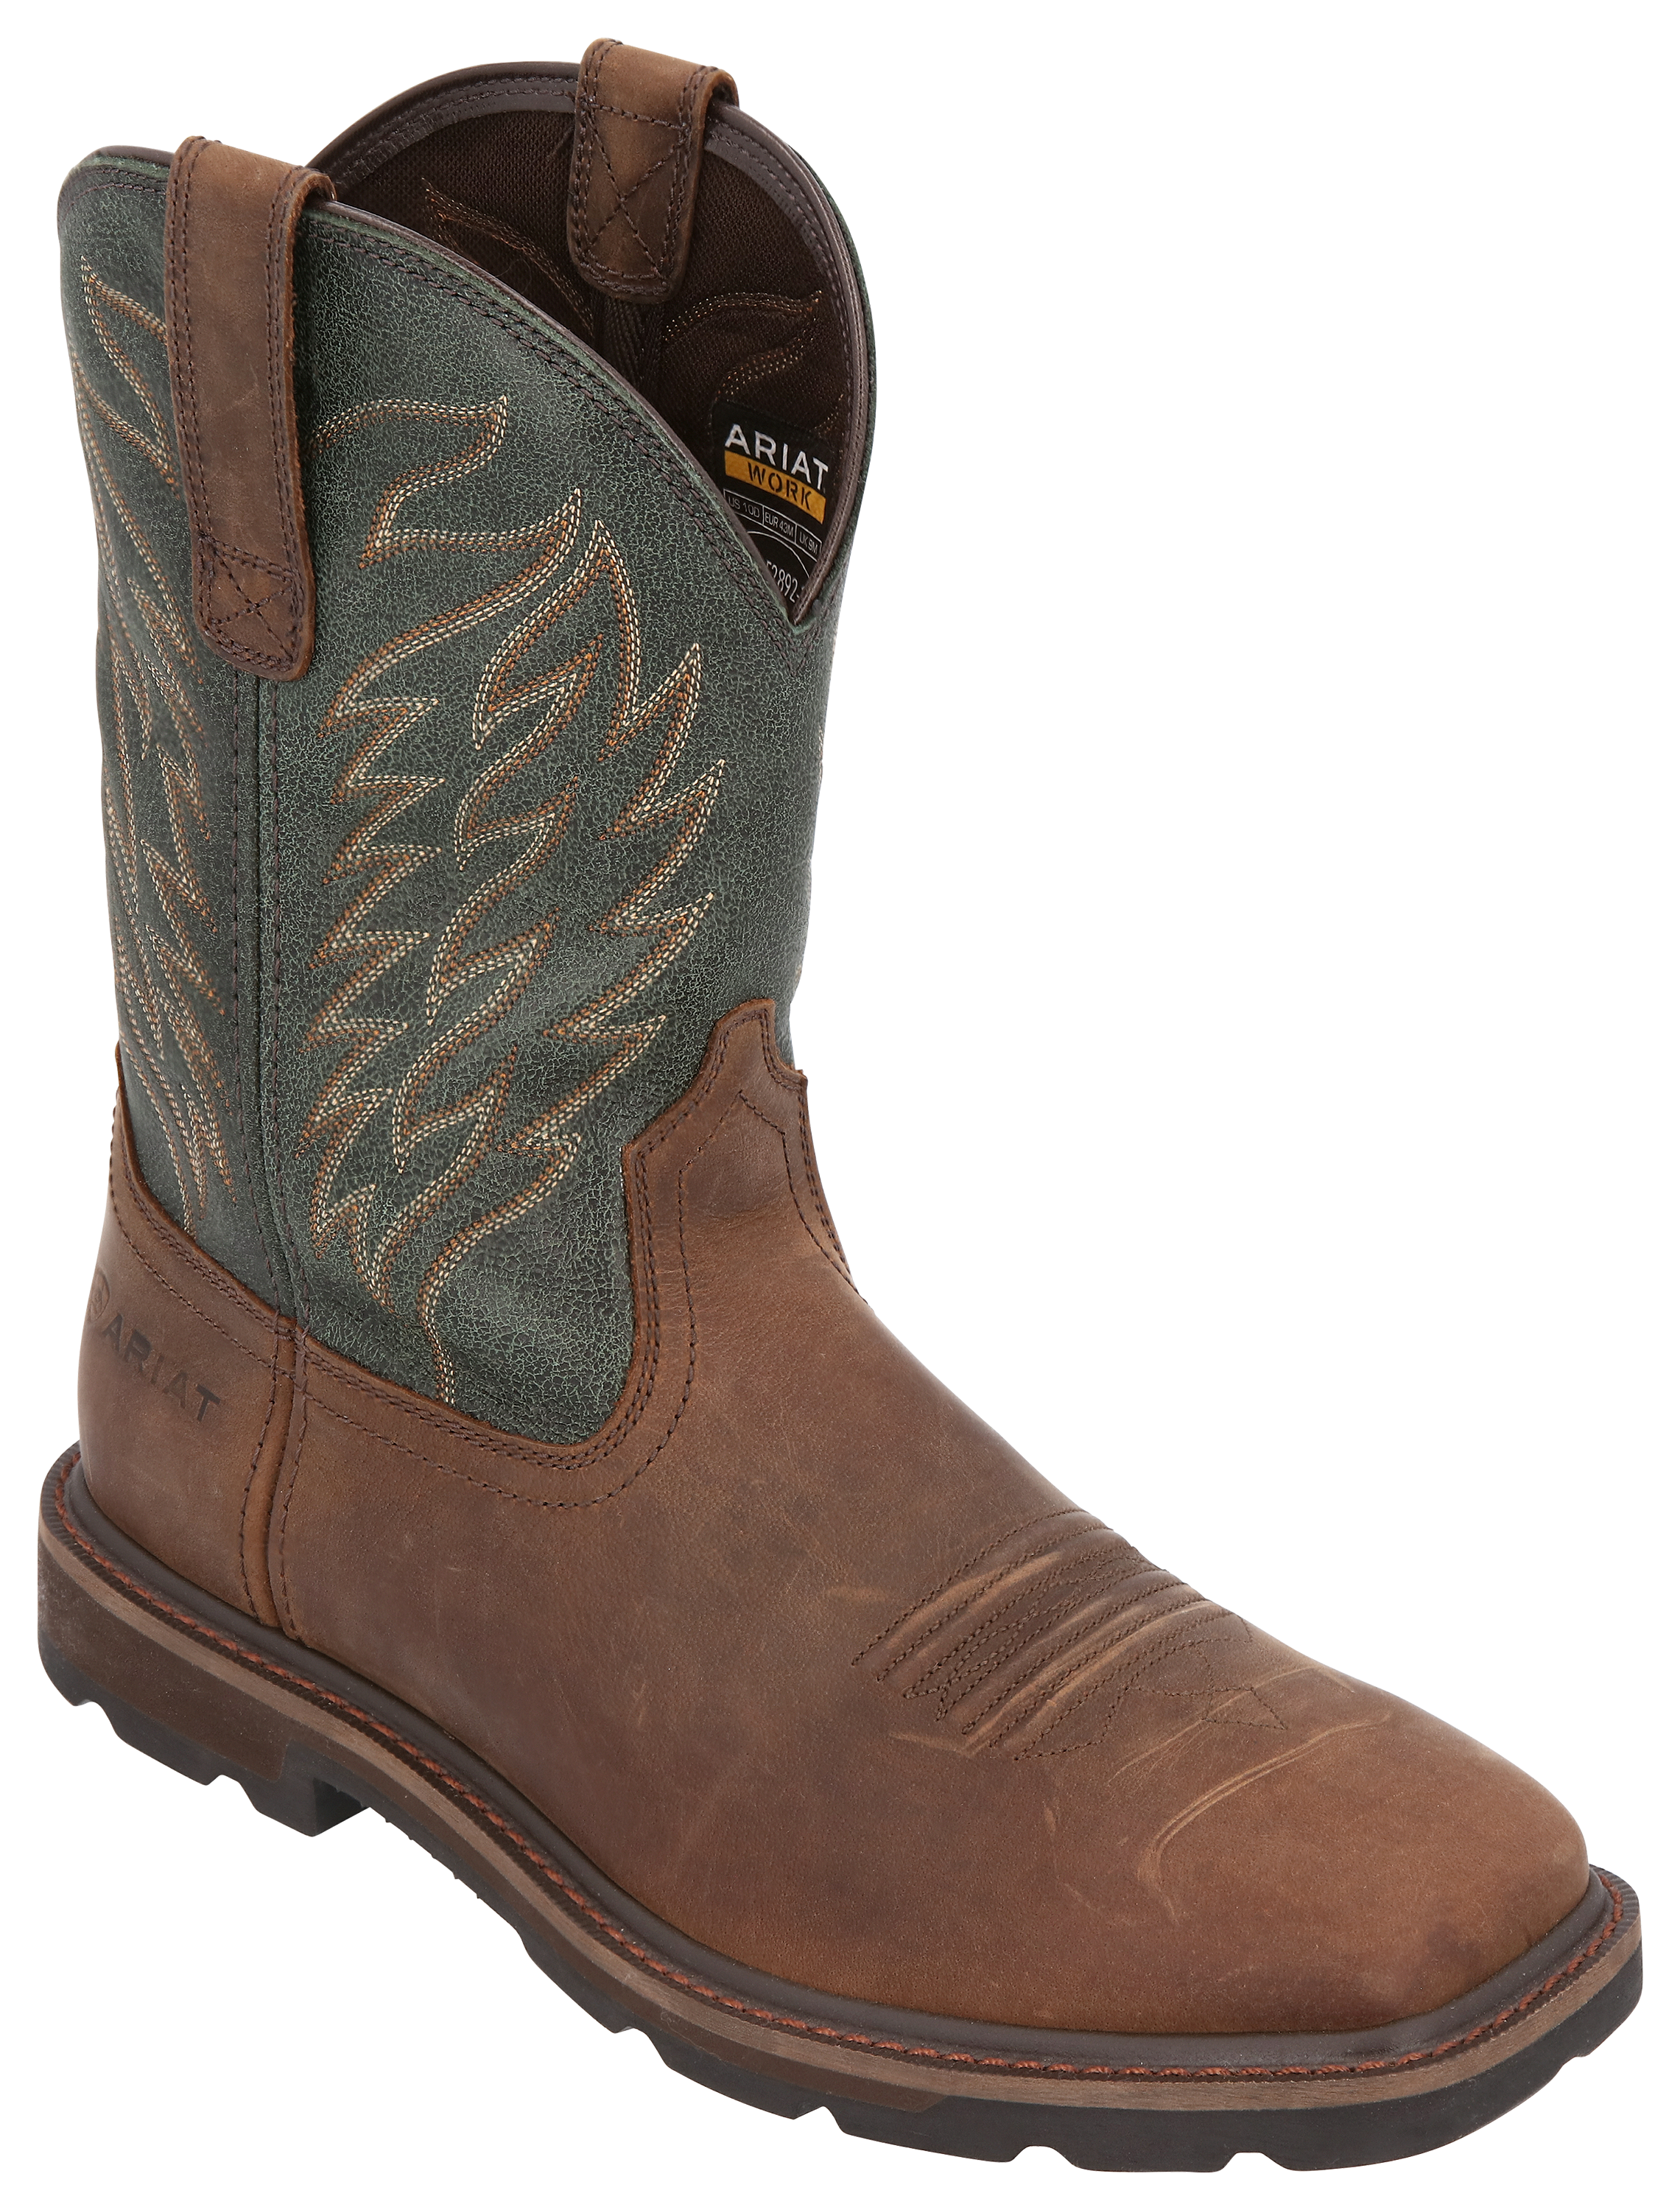 Does Cabelas Sell Ariat?